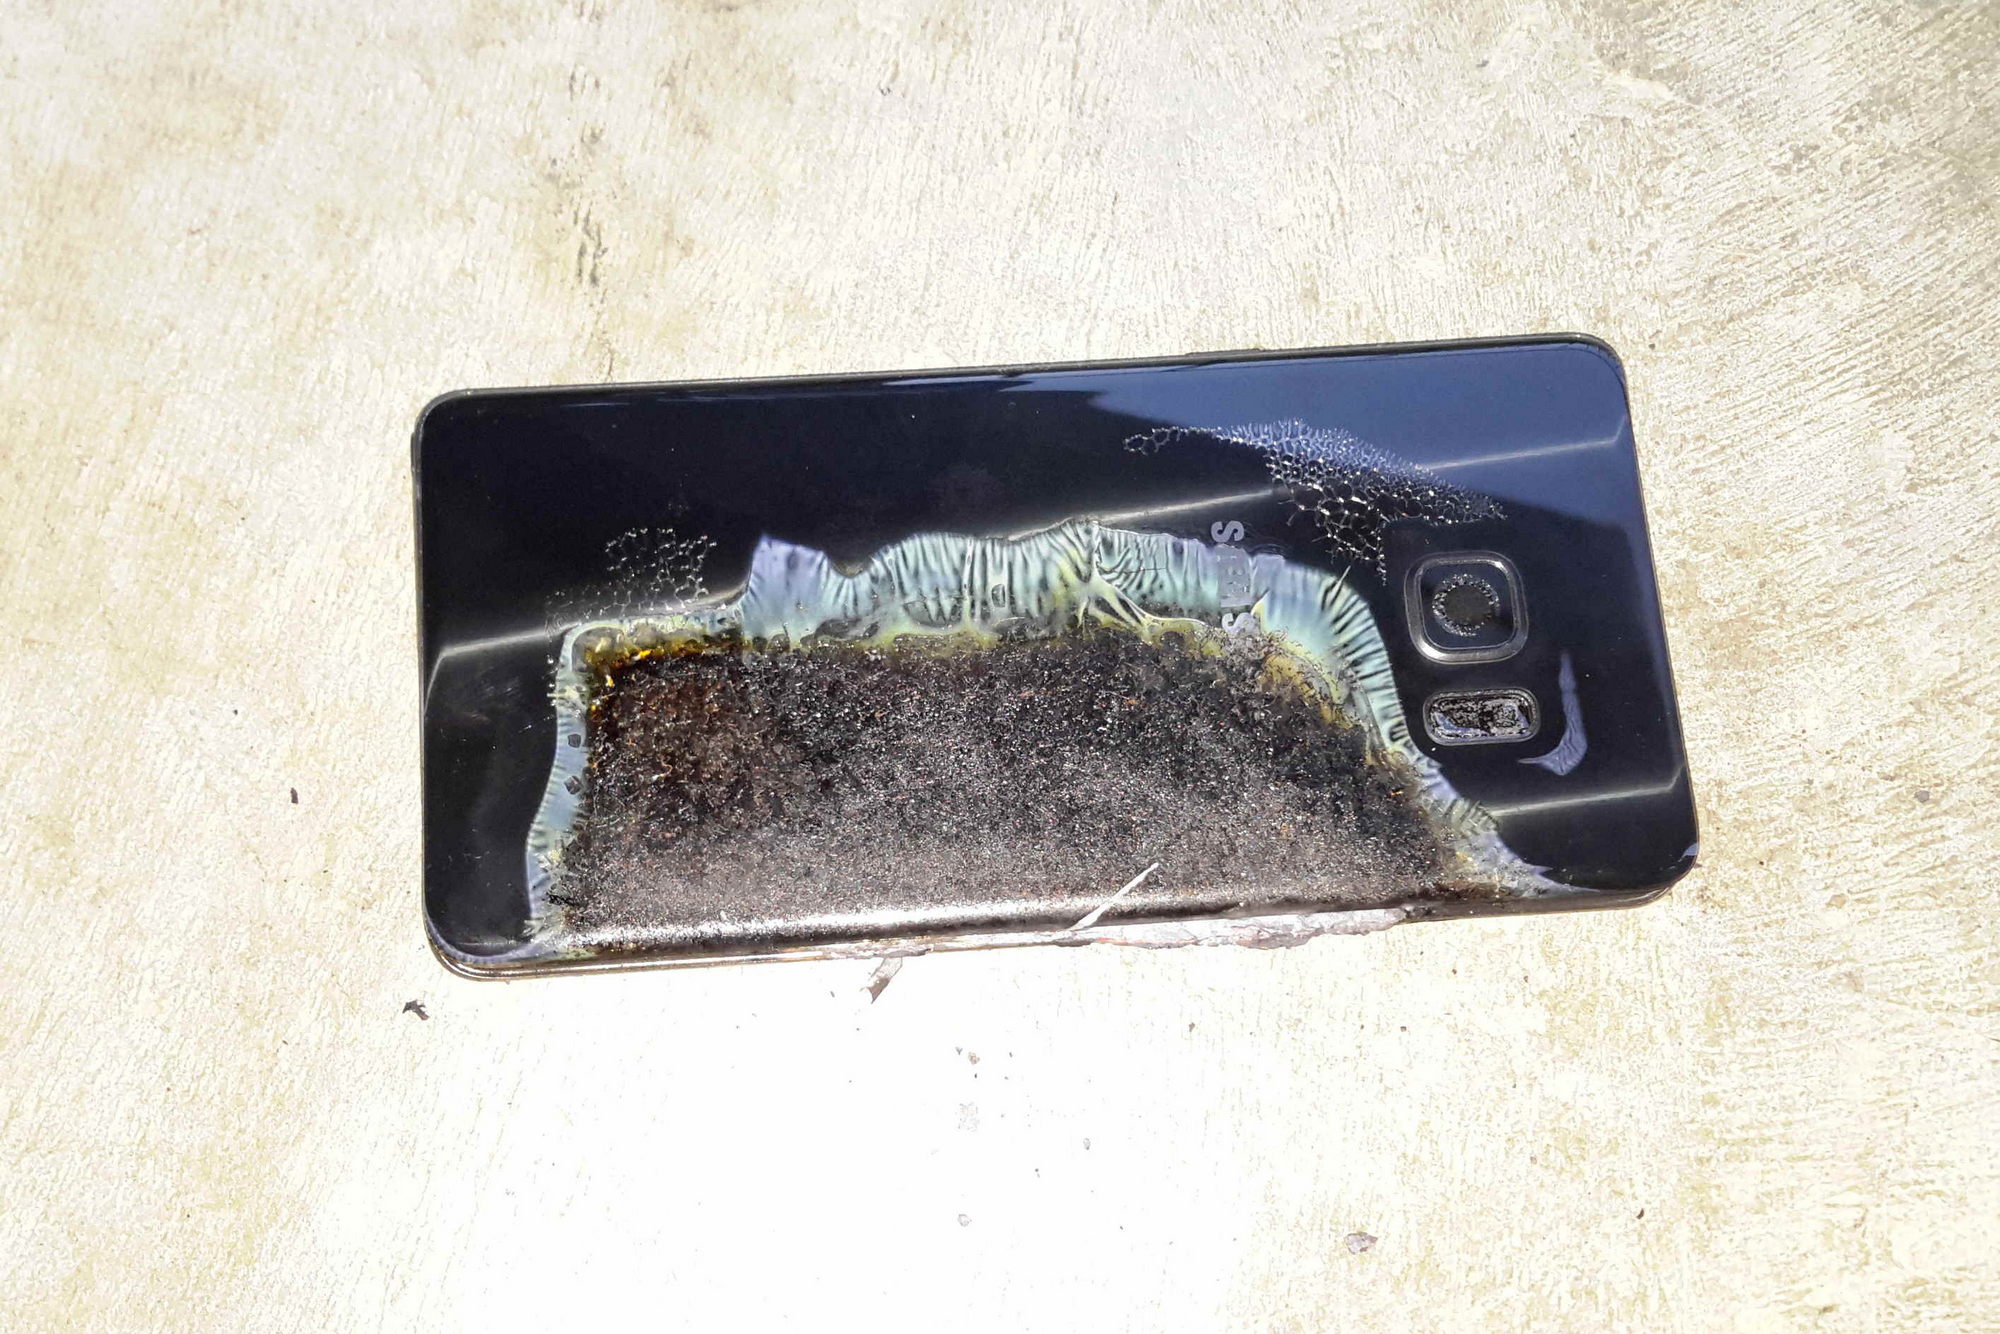 Galaxy 7 recall: what to know (Note 7 officially discontinued) Android Authority